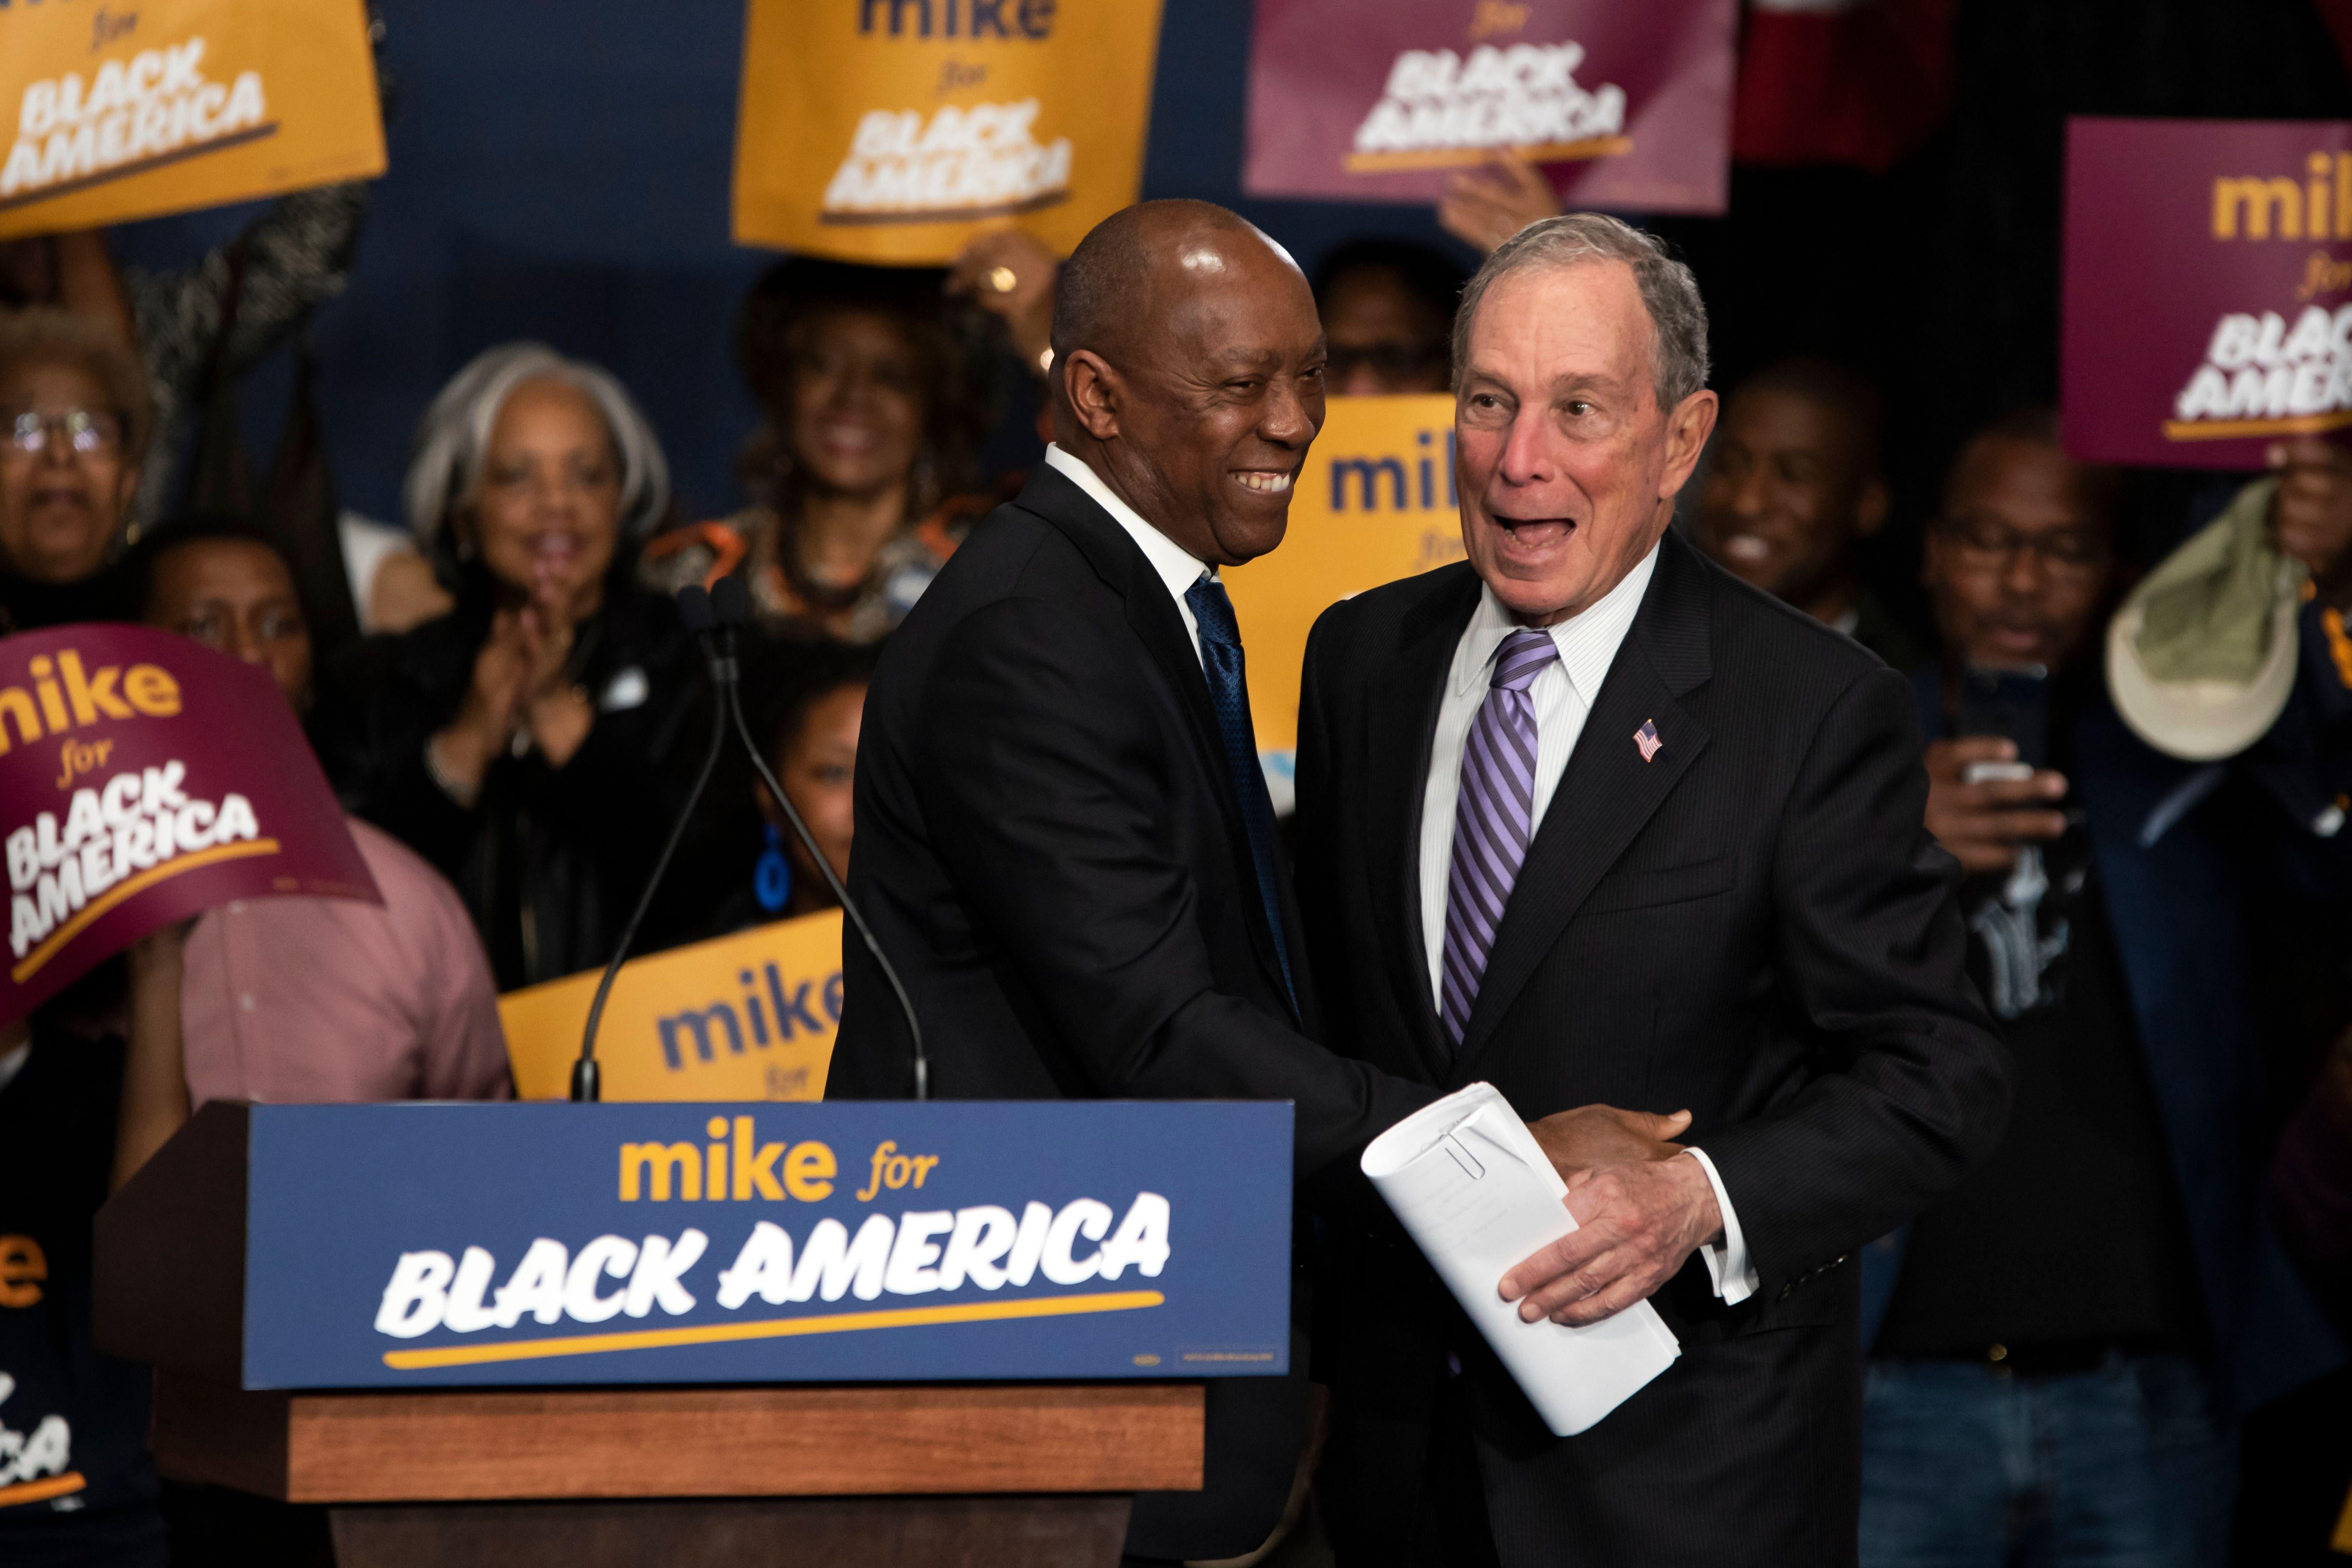 Mike Bloomberg receives a hug from a man onstage at a rally.